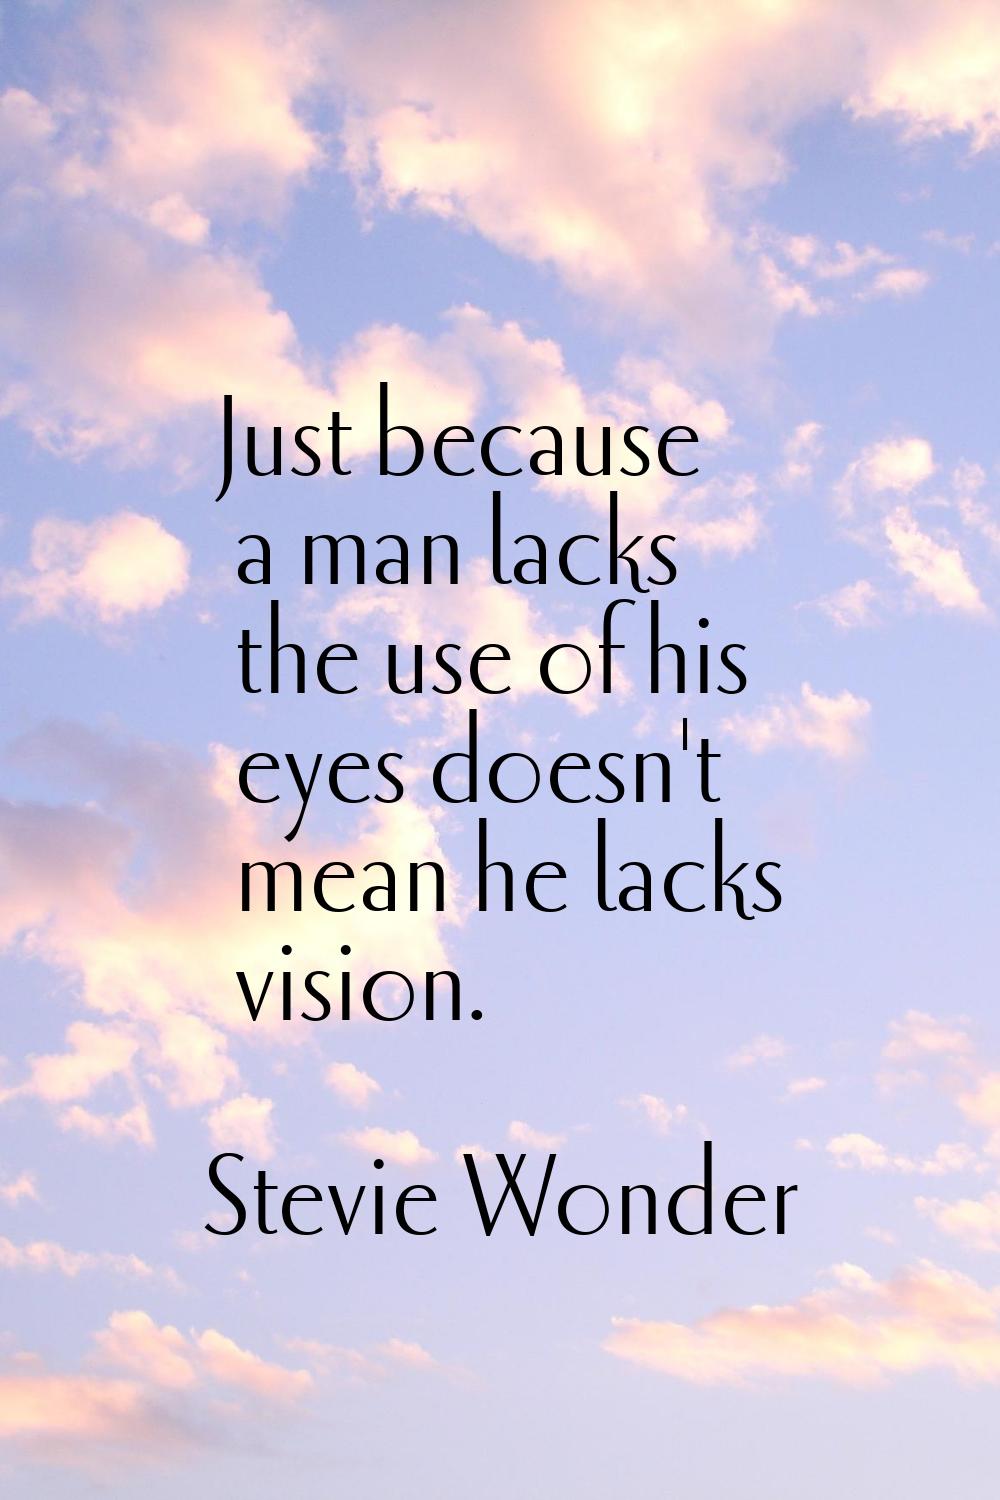 Just because a man lacks the use of his eyes doesn't mean he lacks vision.